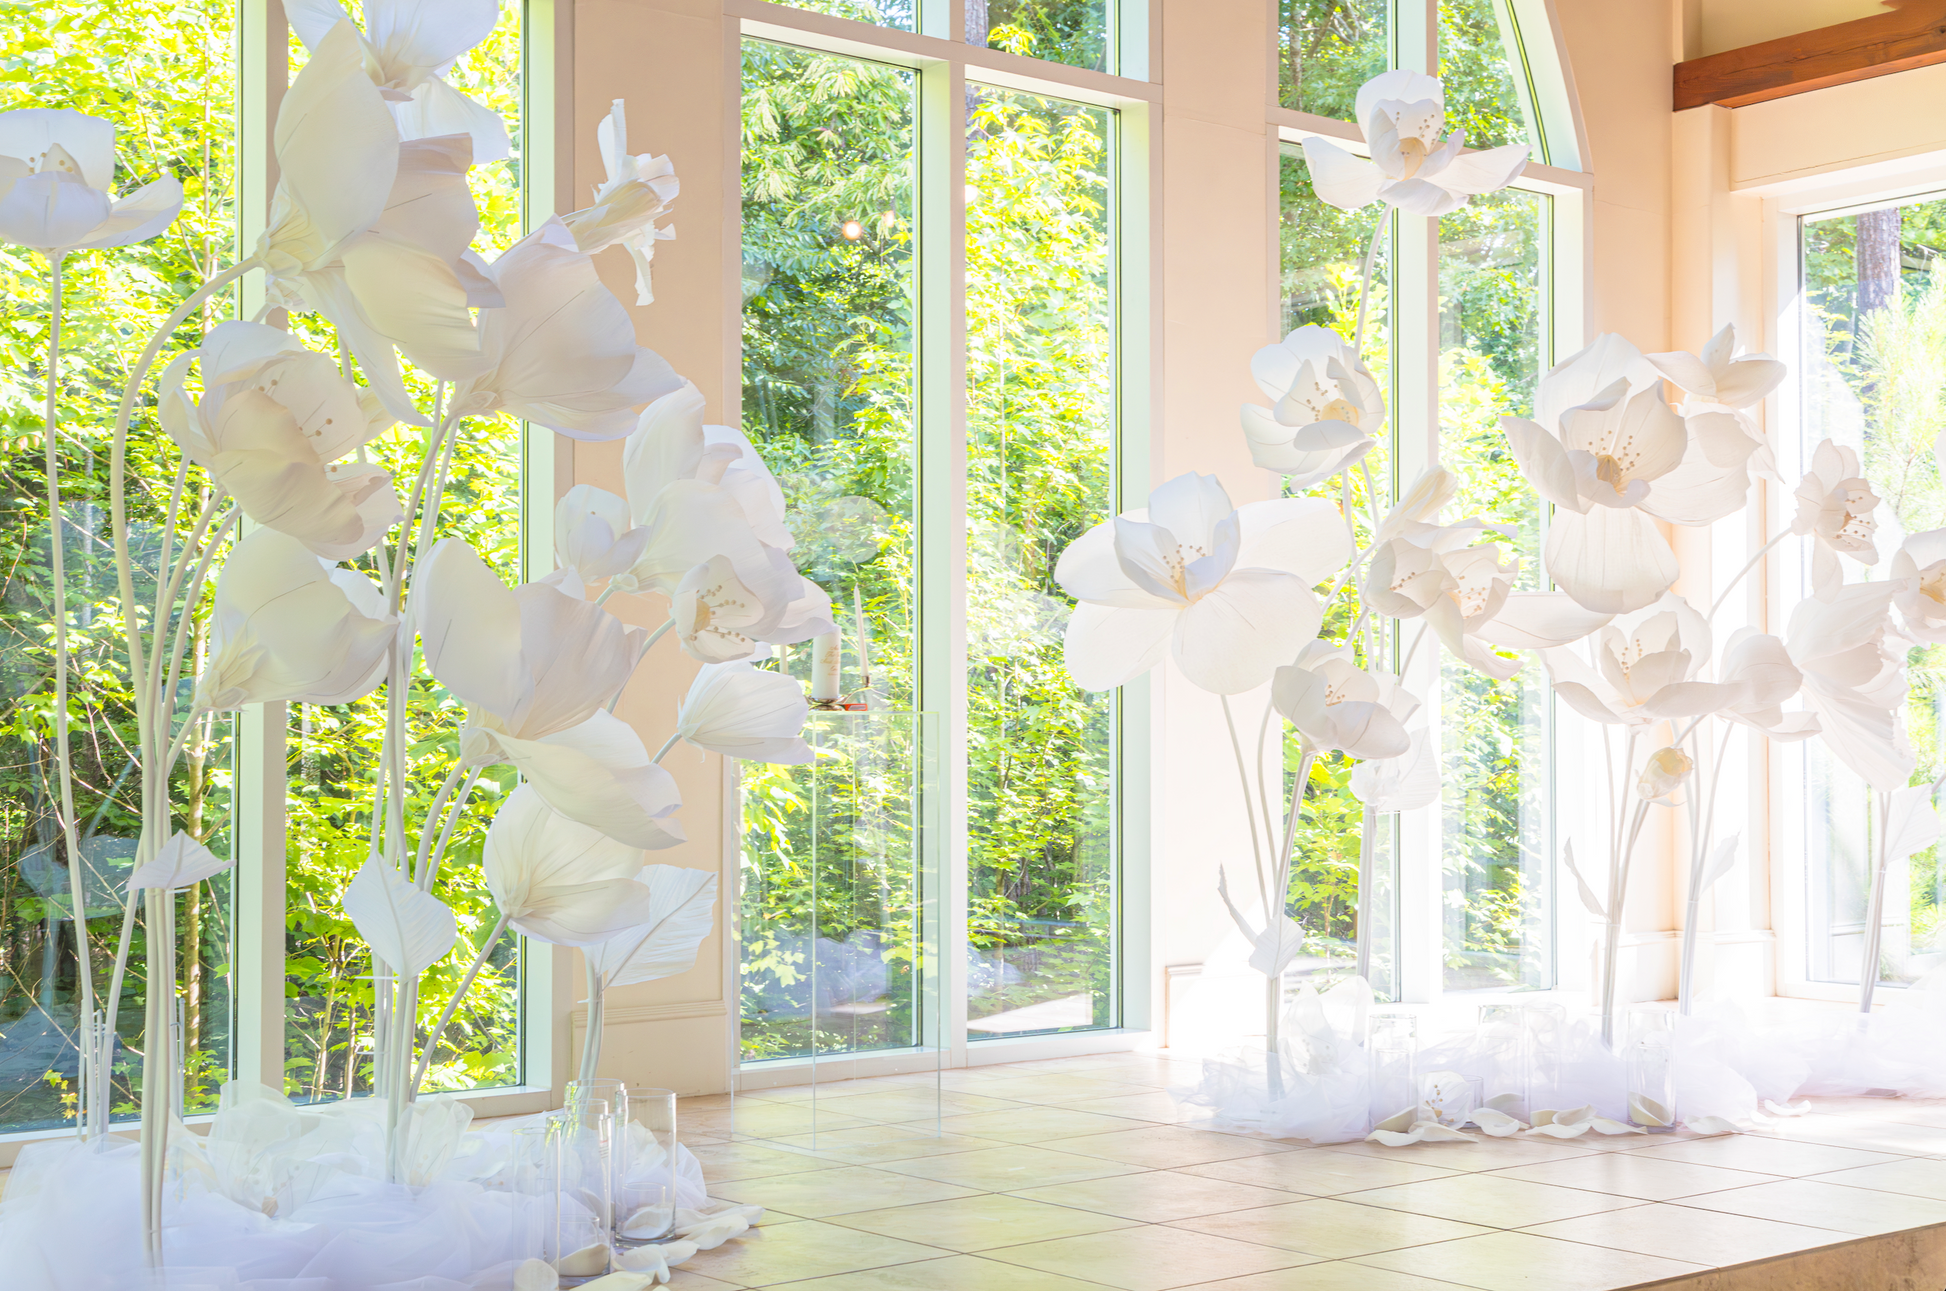 Giant White Flowers for wedding decor at chapel